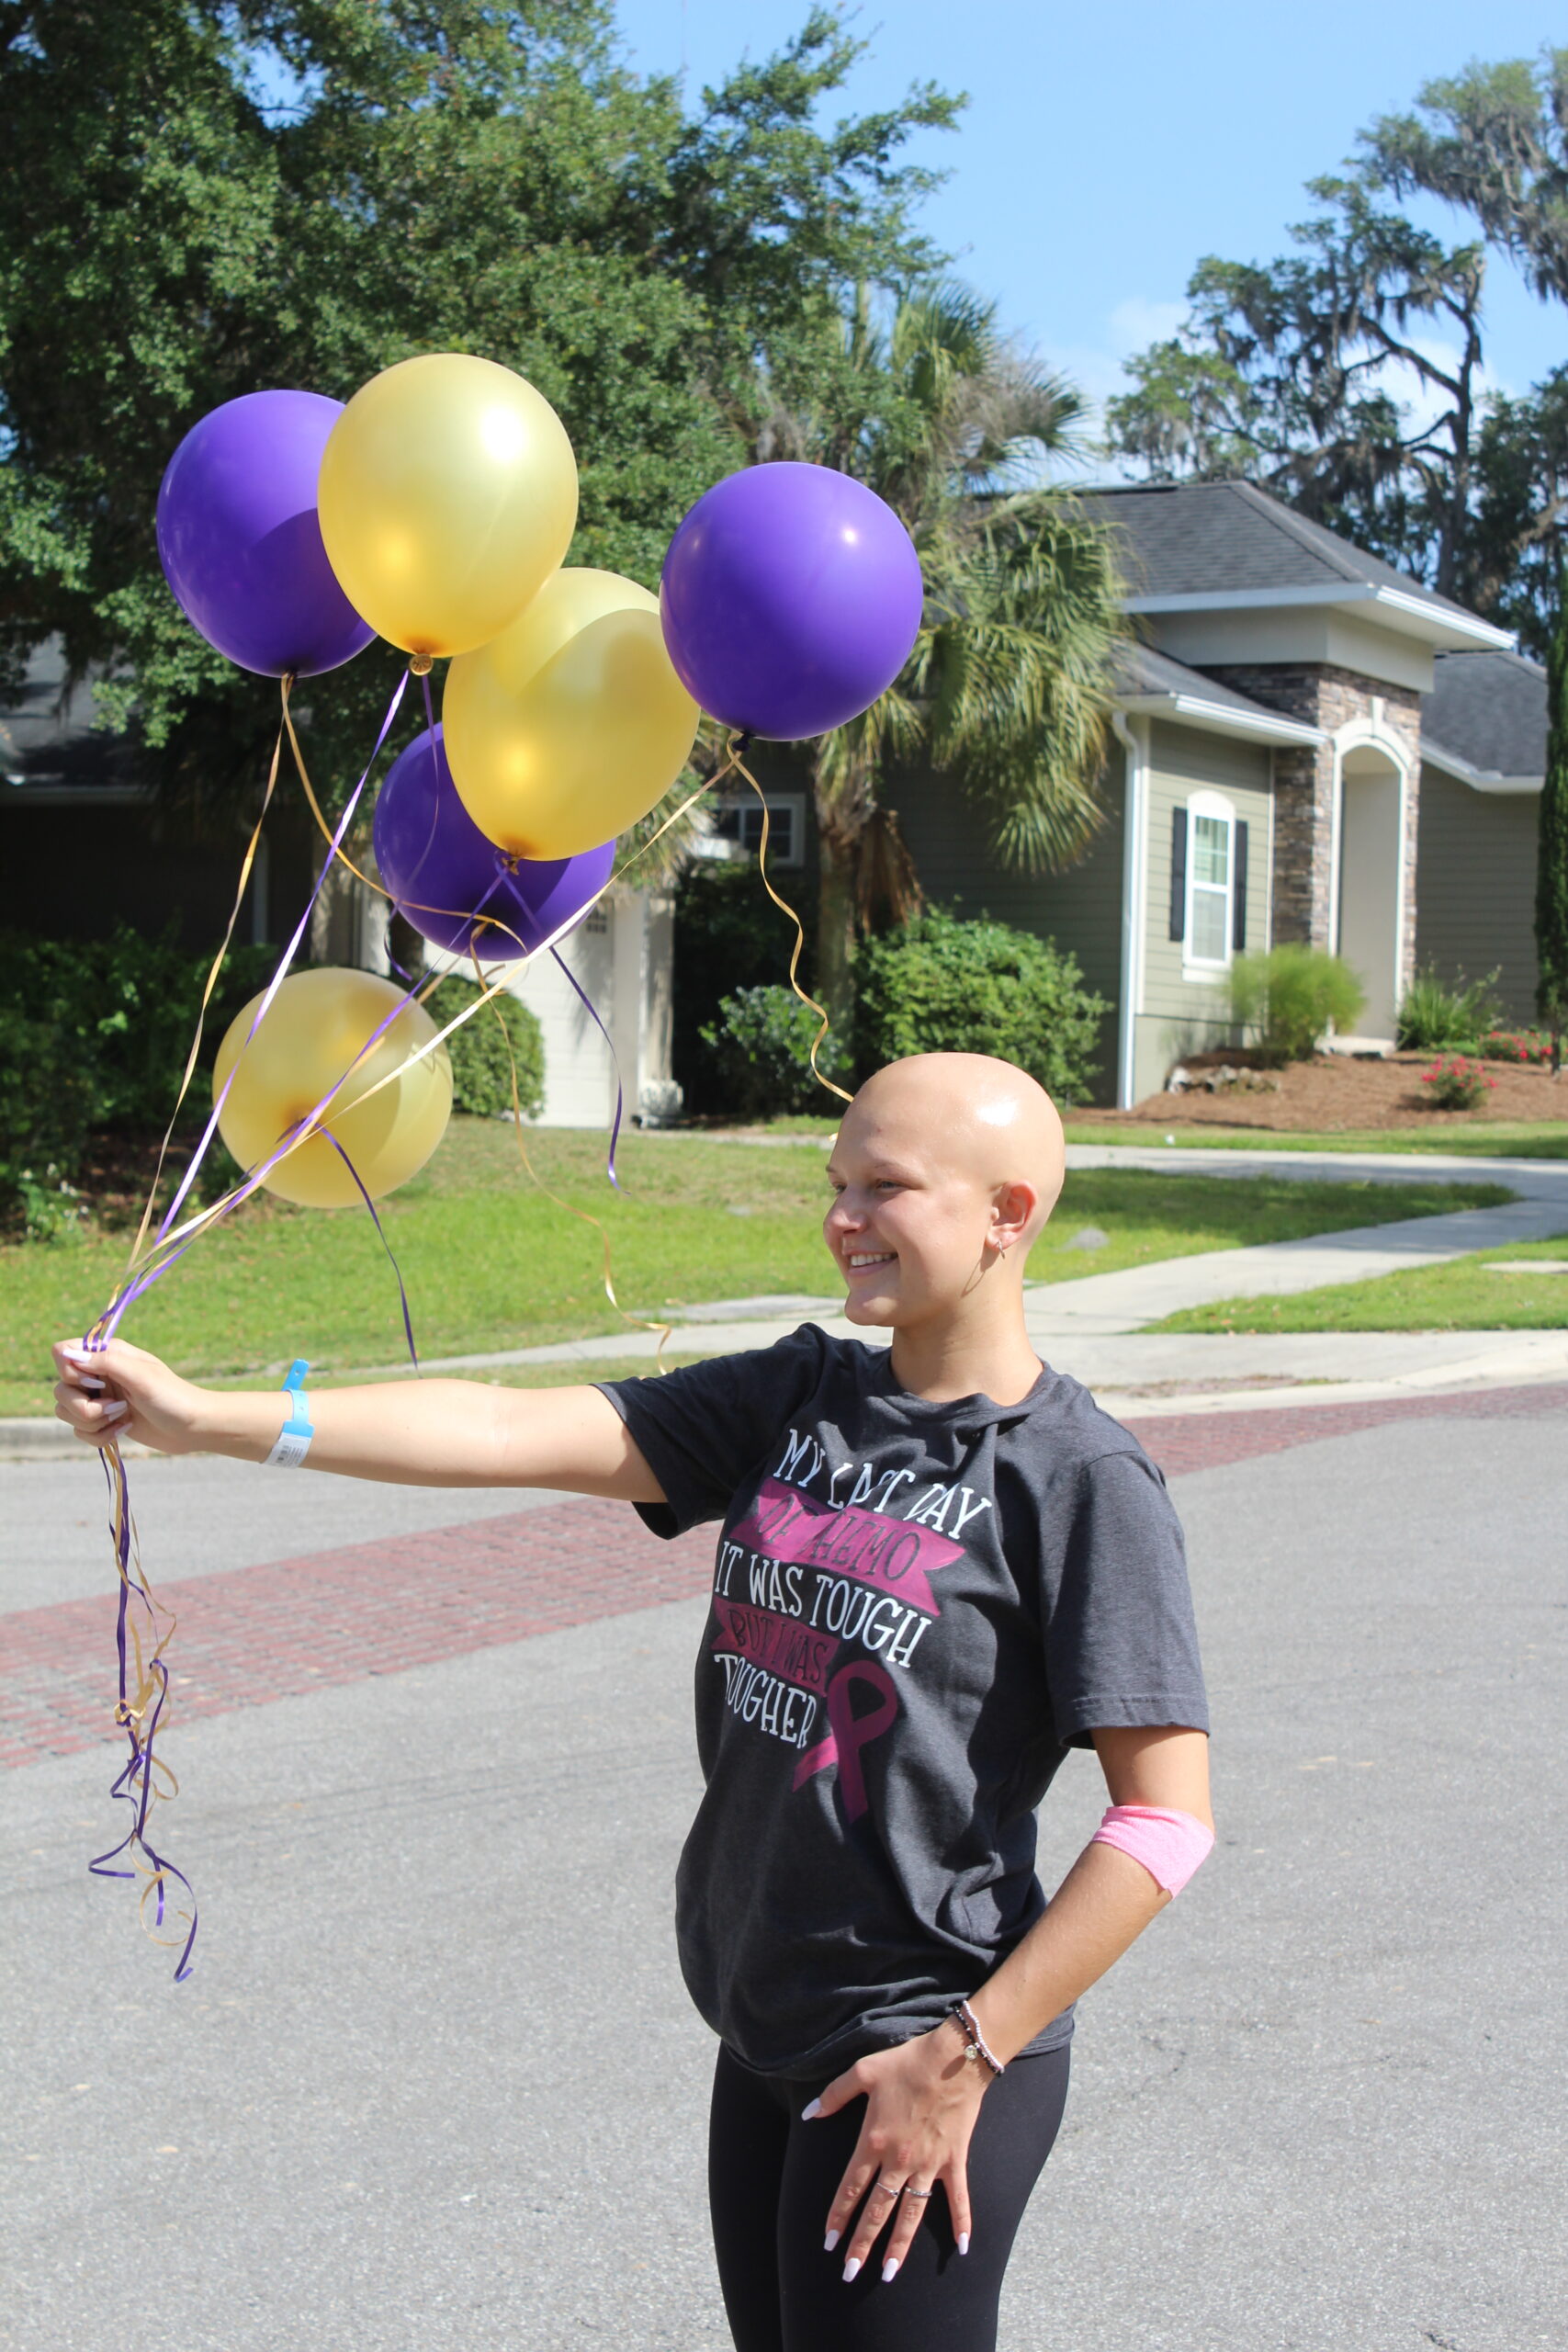 A miraculous journey: USF student survives stage four cancer